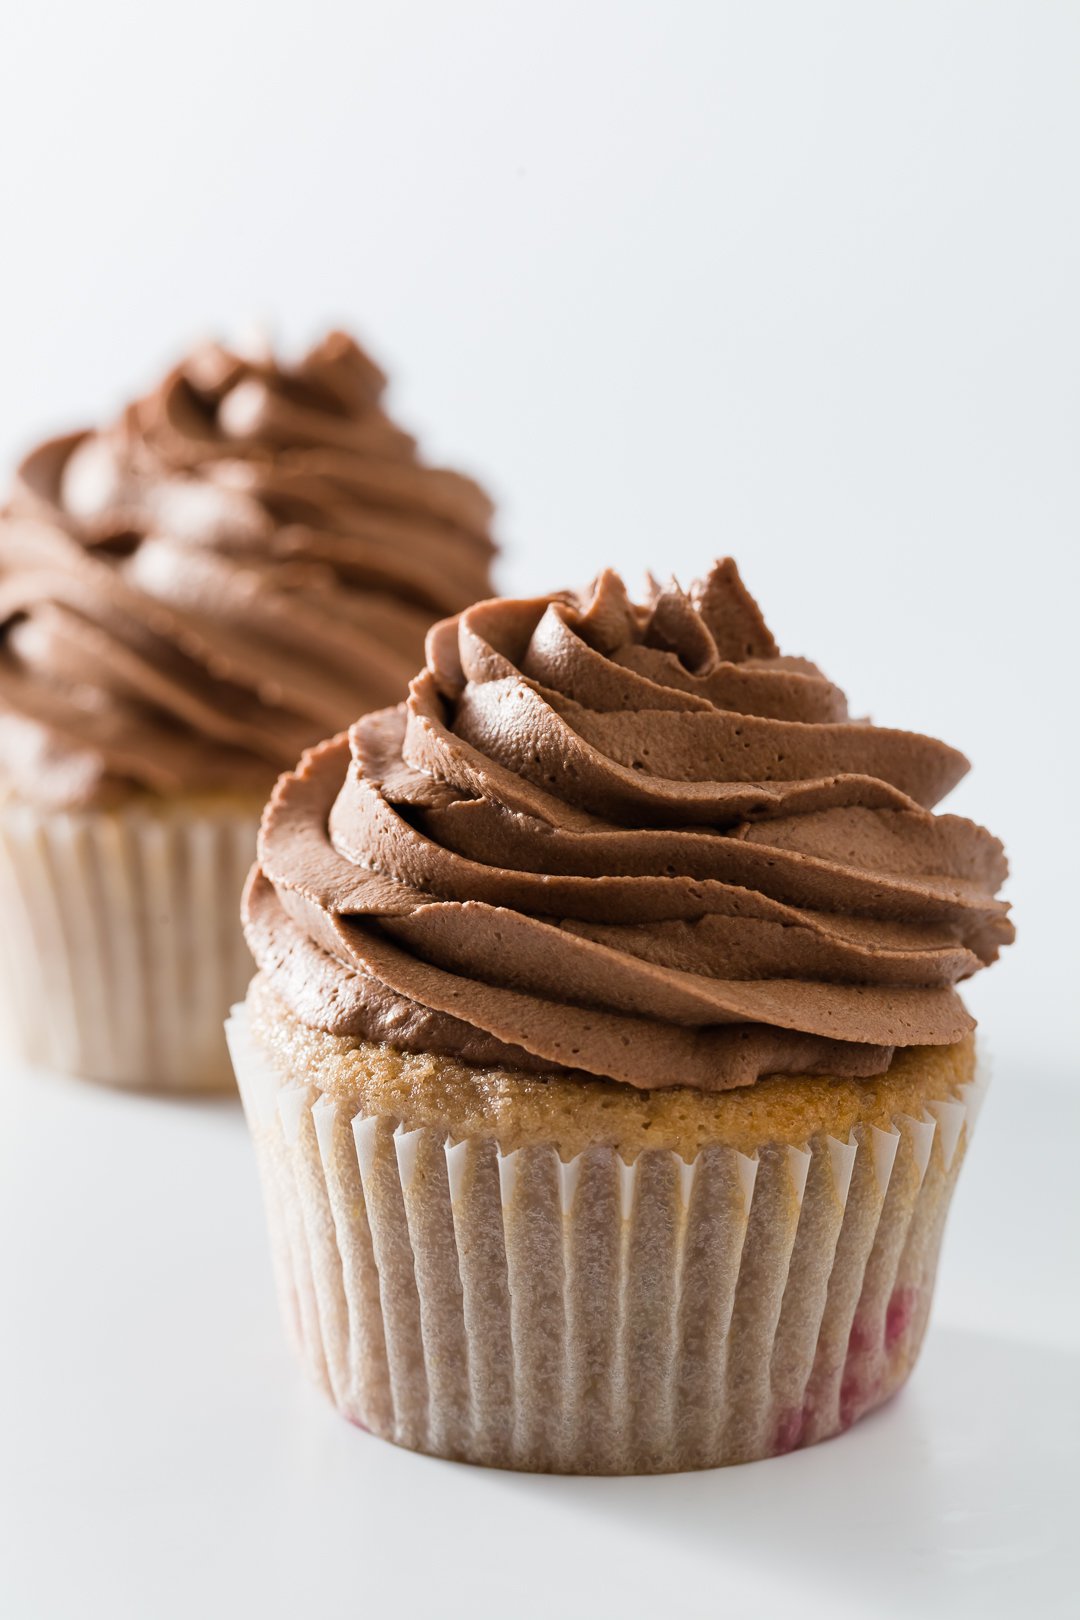 Two cupcakes topped with chocolate whipped cream